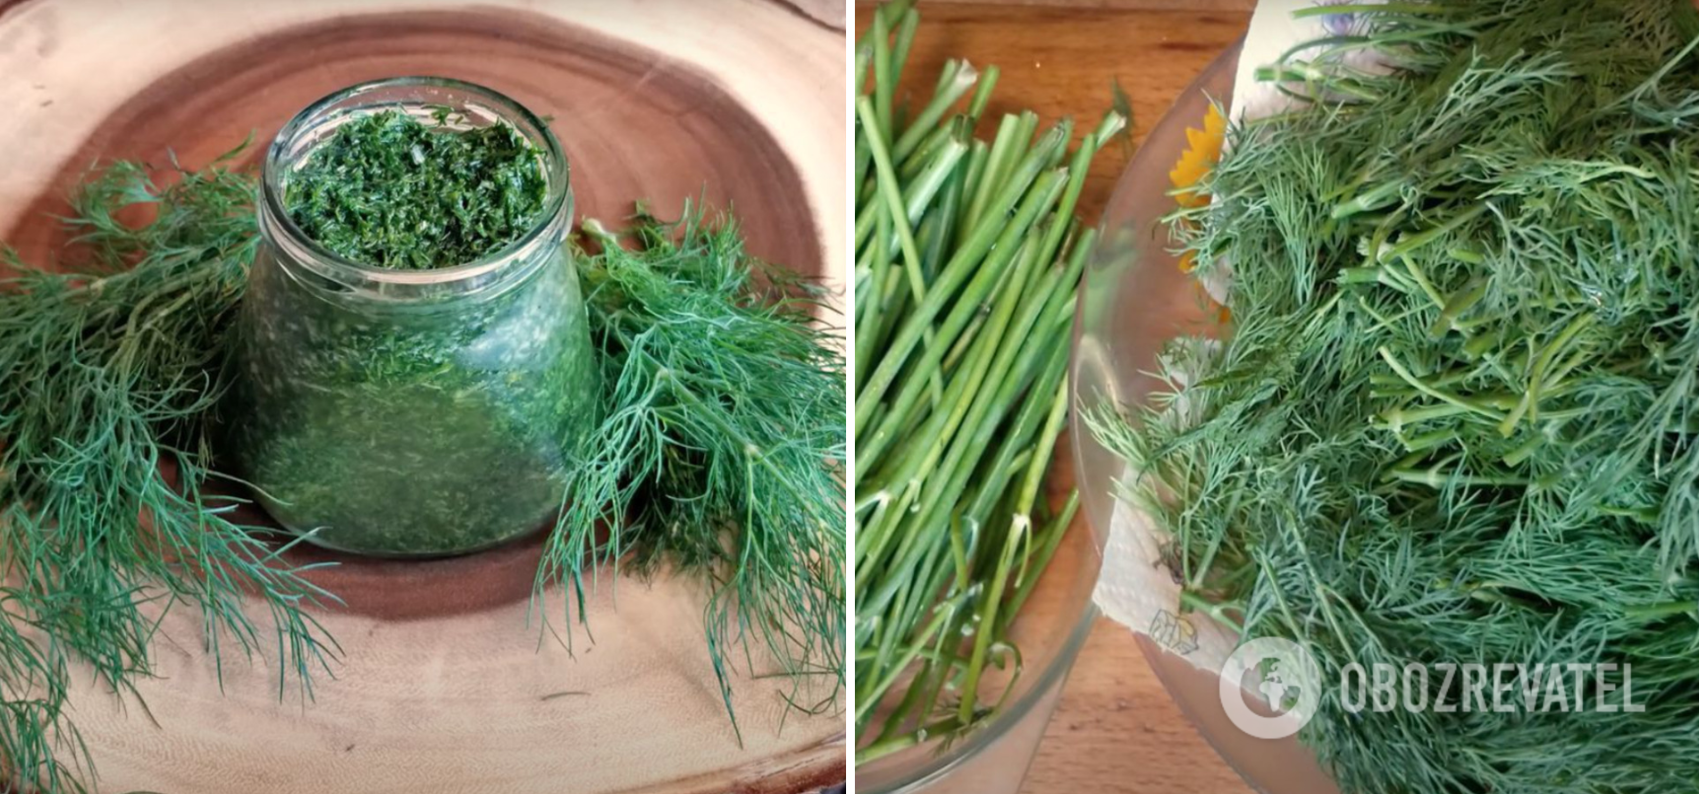 How to salt herbs for the winter